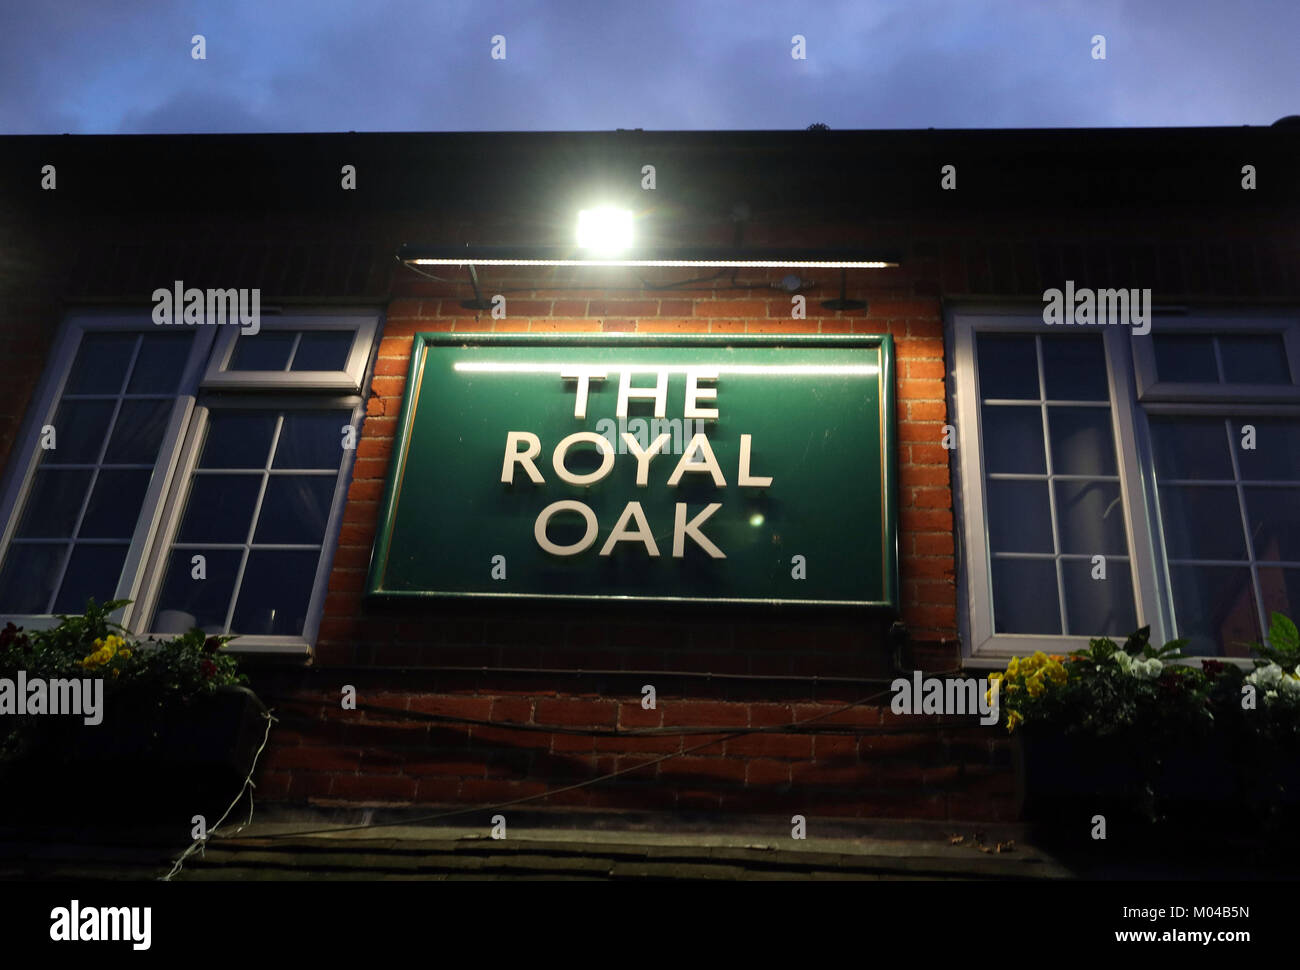 The Royal Oak pub, in Yateley, Hampshire which was confused by French President Emmanuel Macron in a tweet as the venue where he met Prime Minister Theresa May for a working lunch. Stock Photo